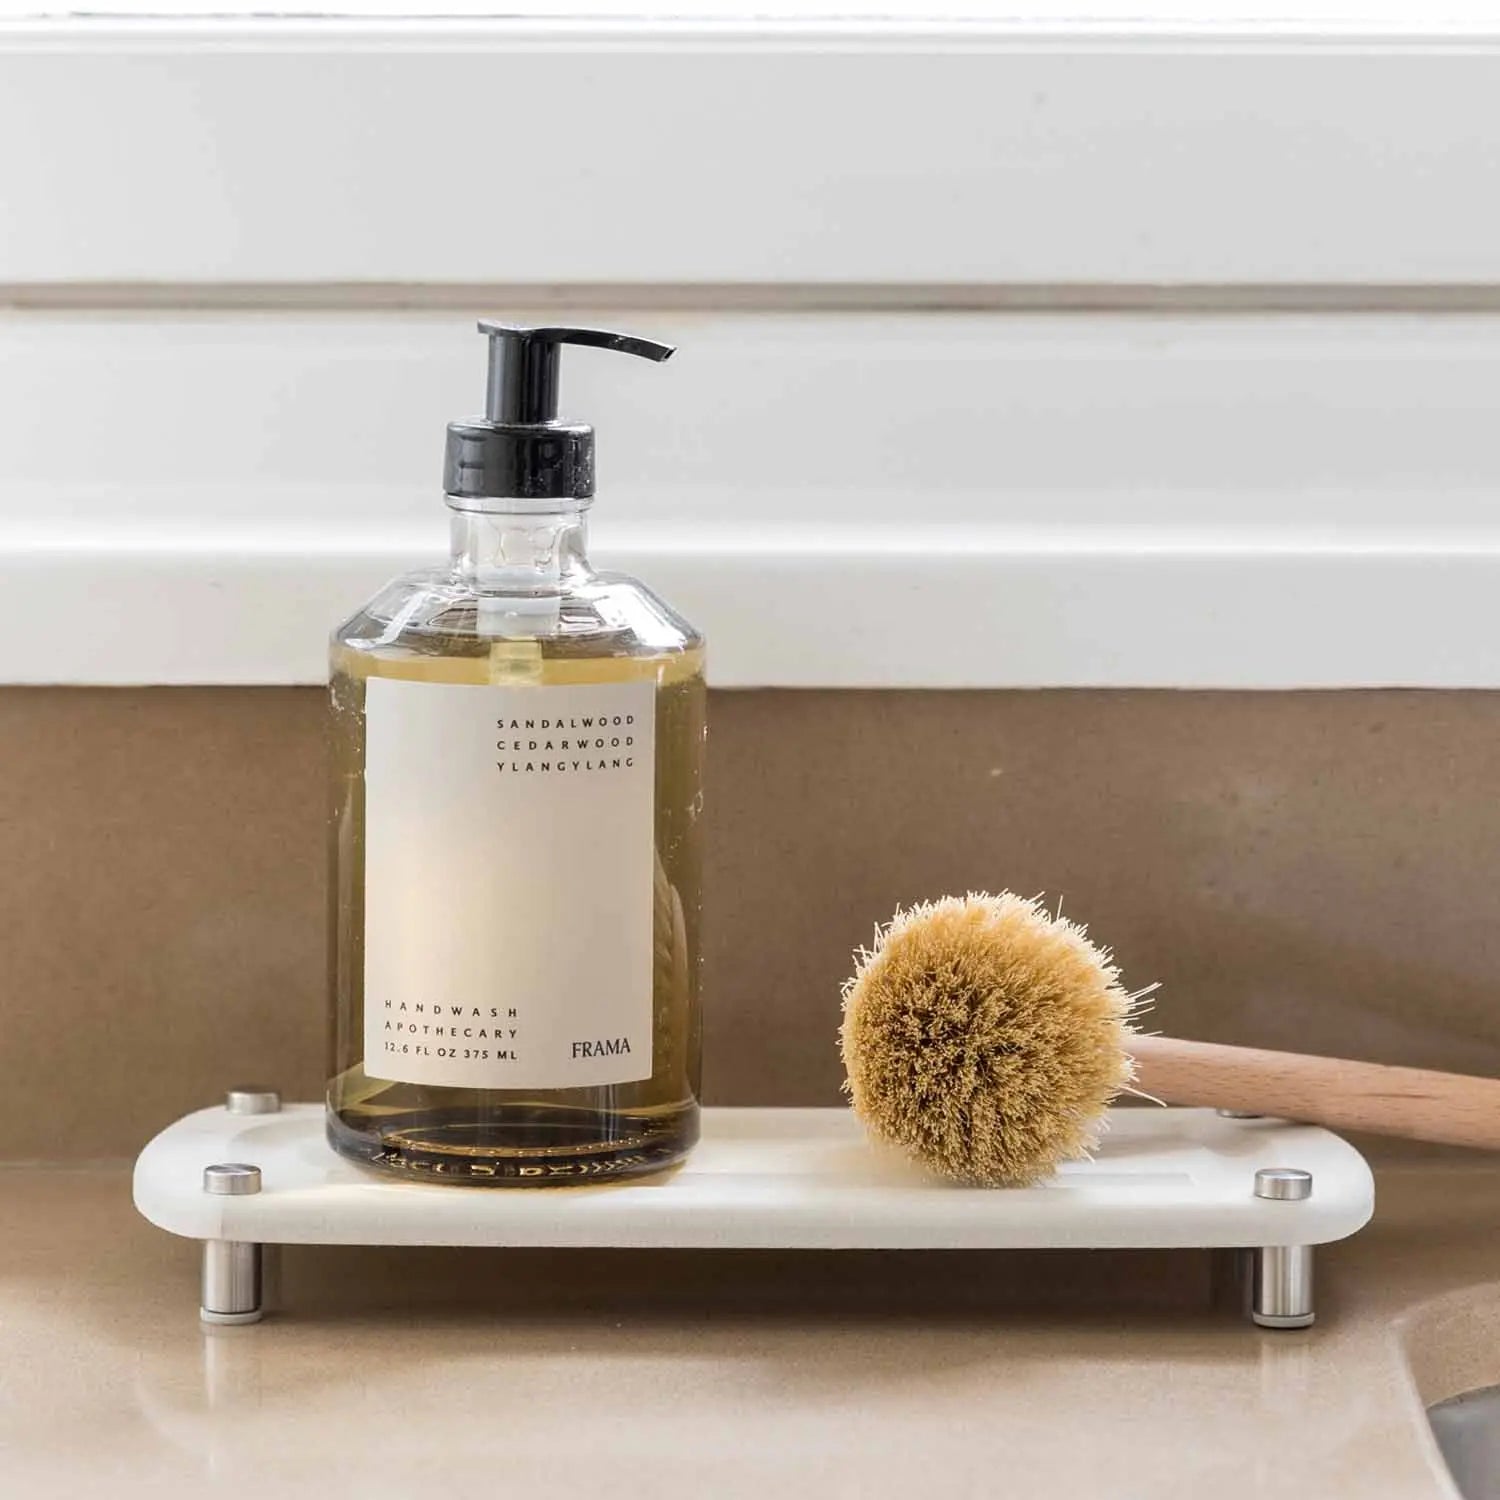 Sink caddy with soap and scrubber